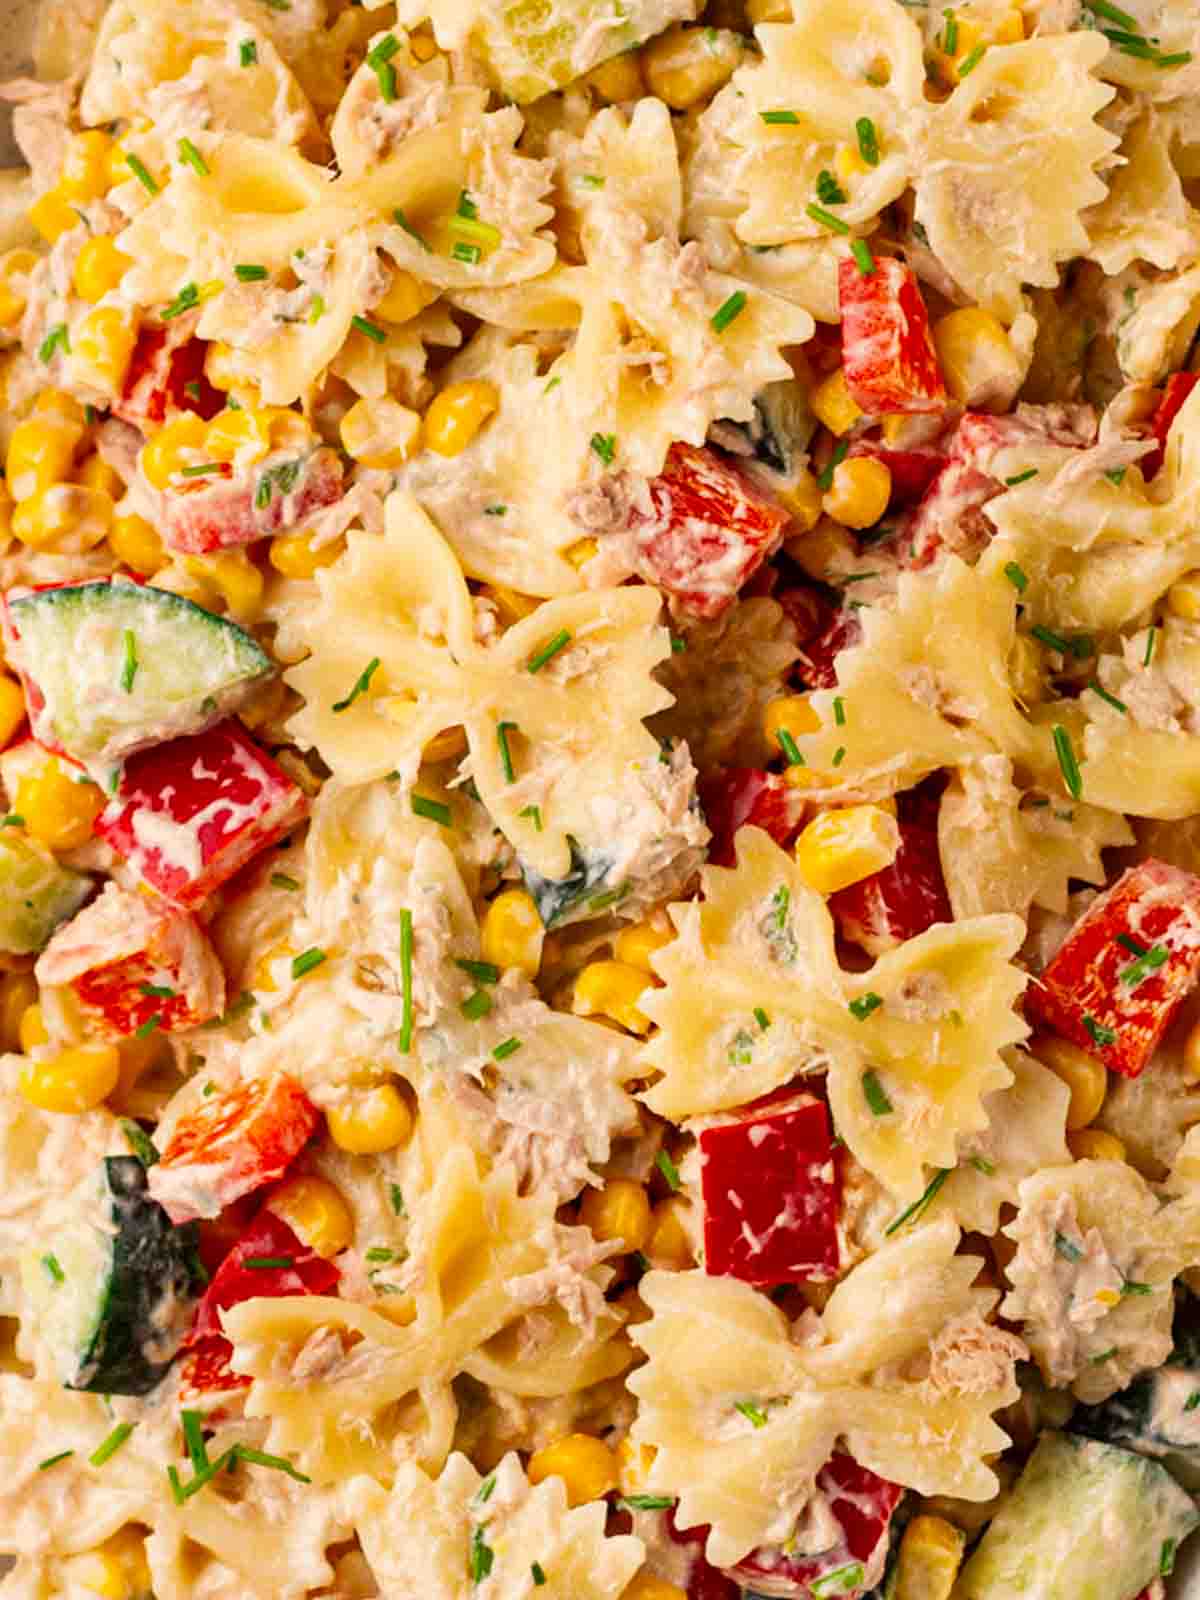 A close up of sweetcorn, tuna, pasta, cucumber and peppers with dressing in a bowl.